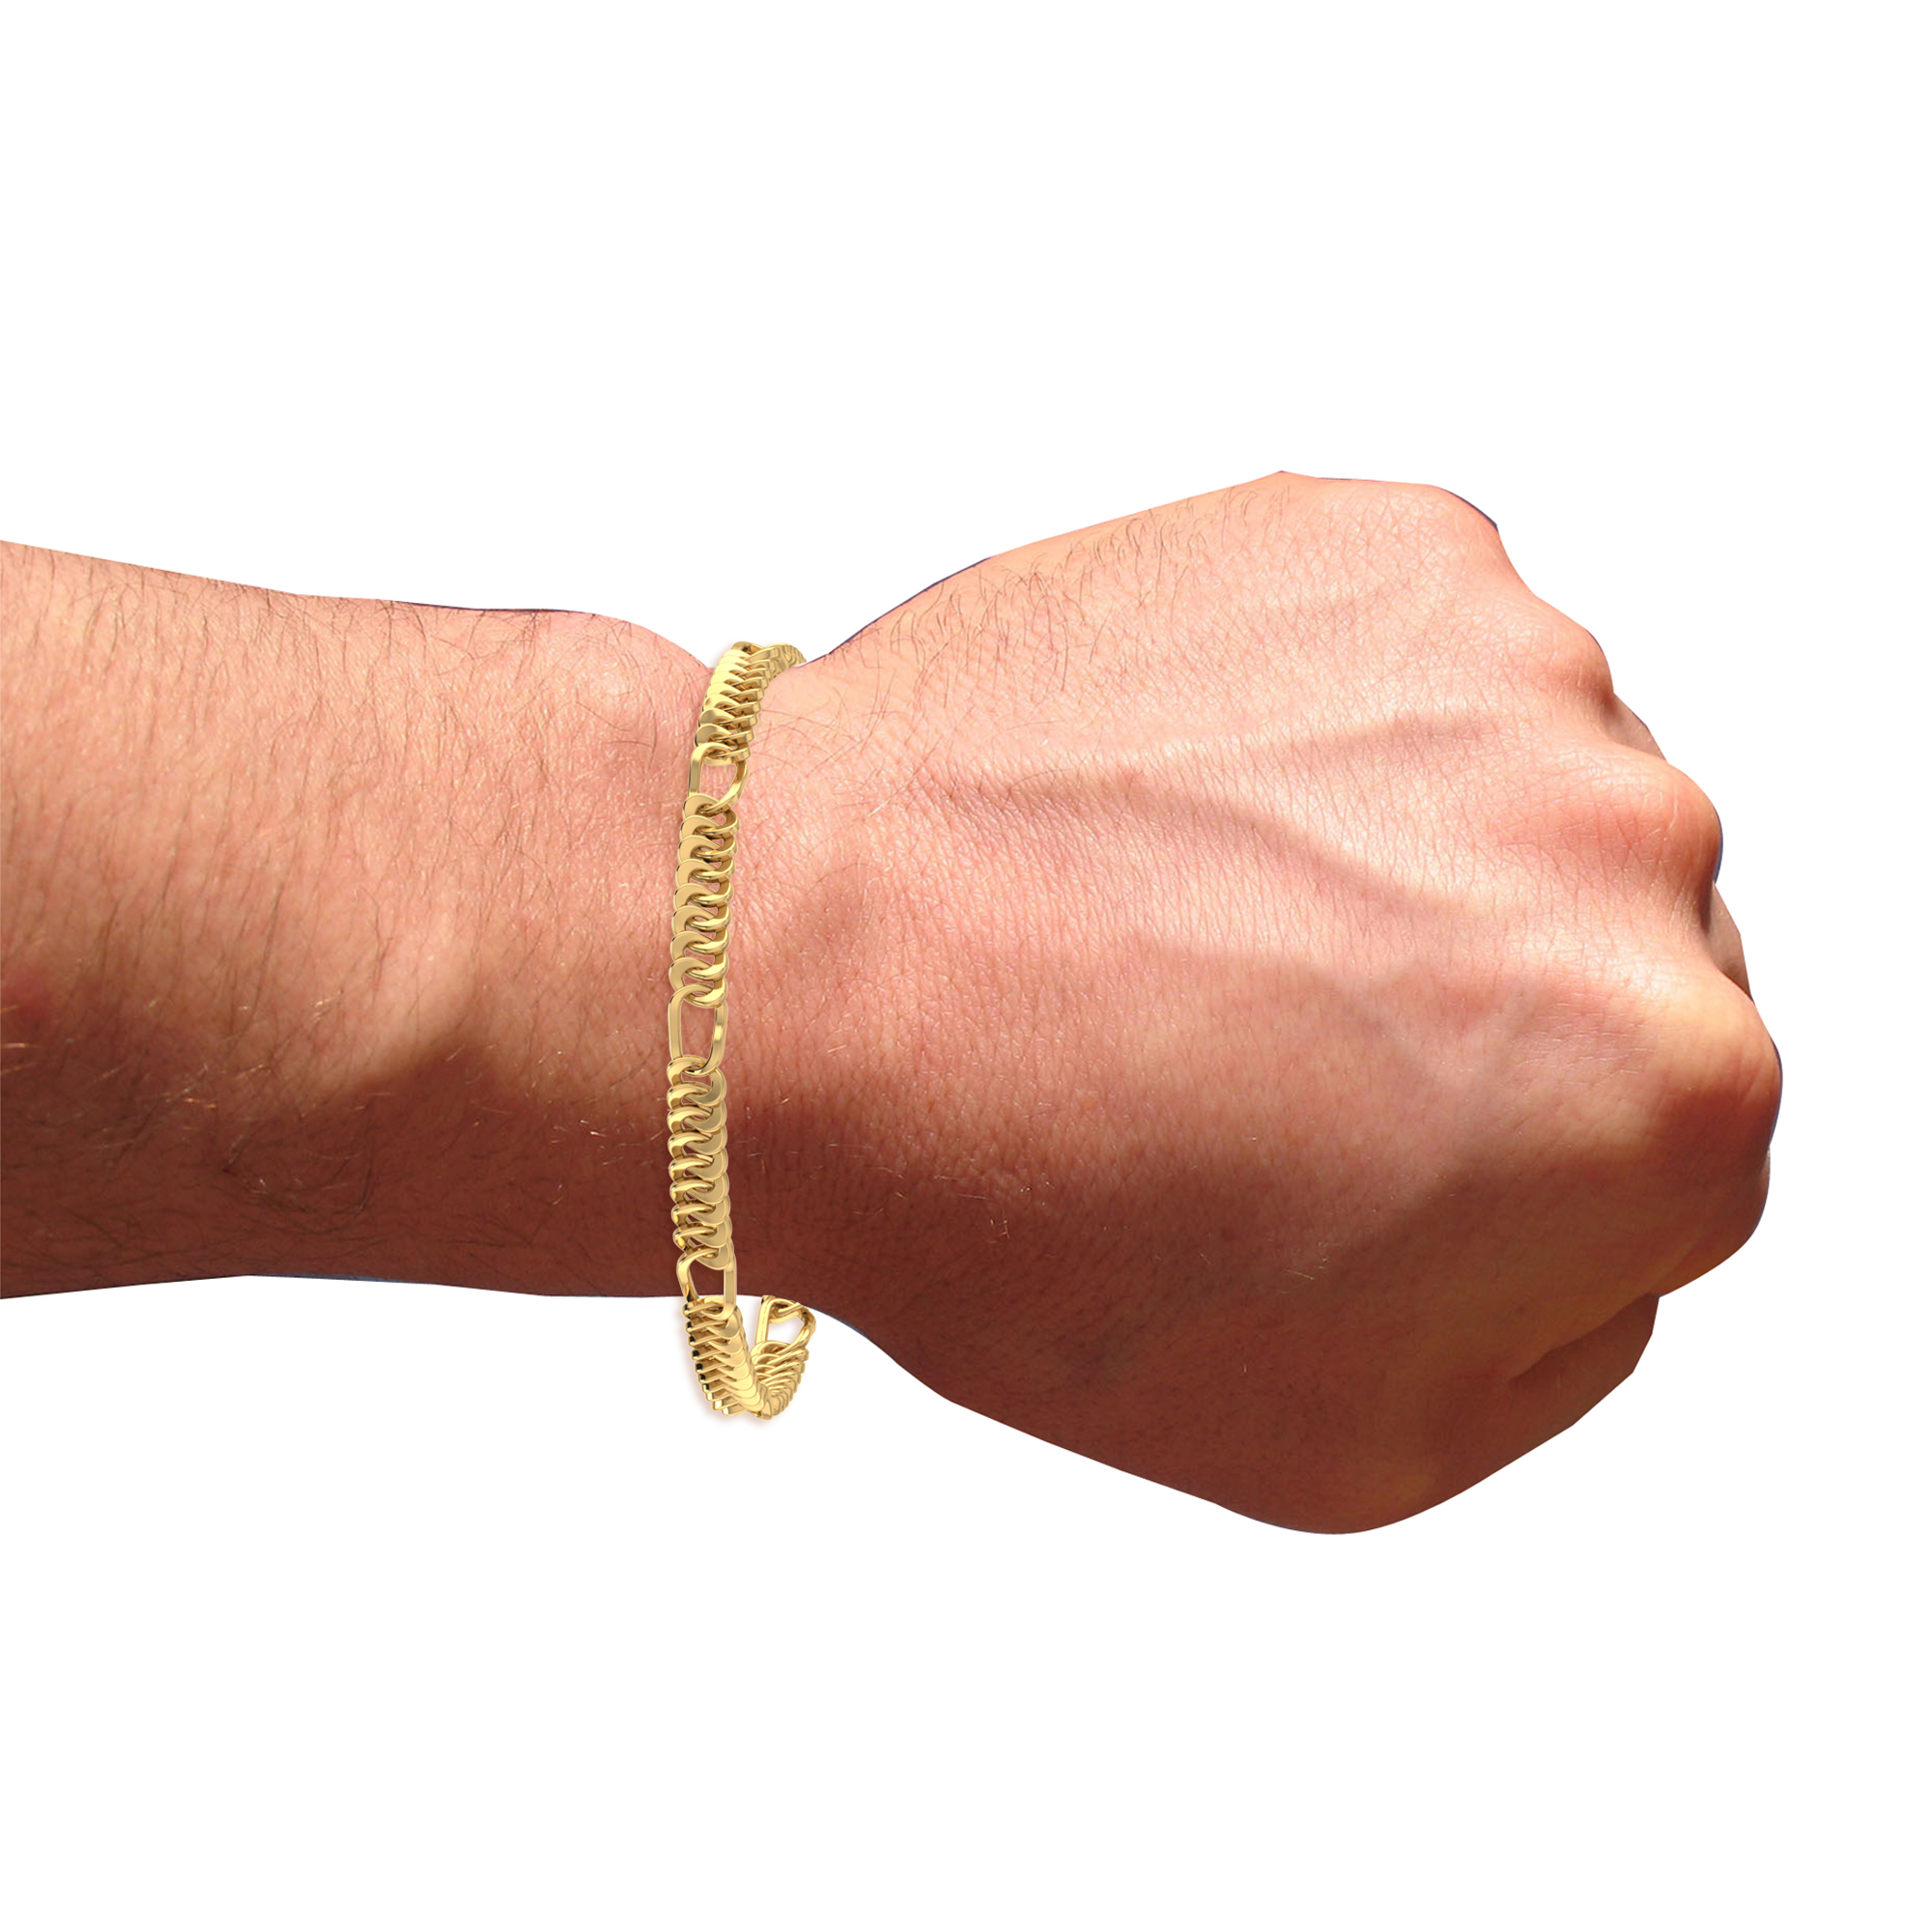 Buy quality 916 gold fancy gents solid bracelet in Ahmedabad